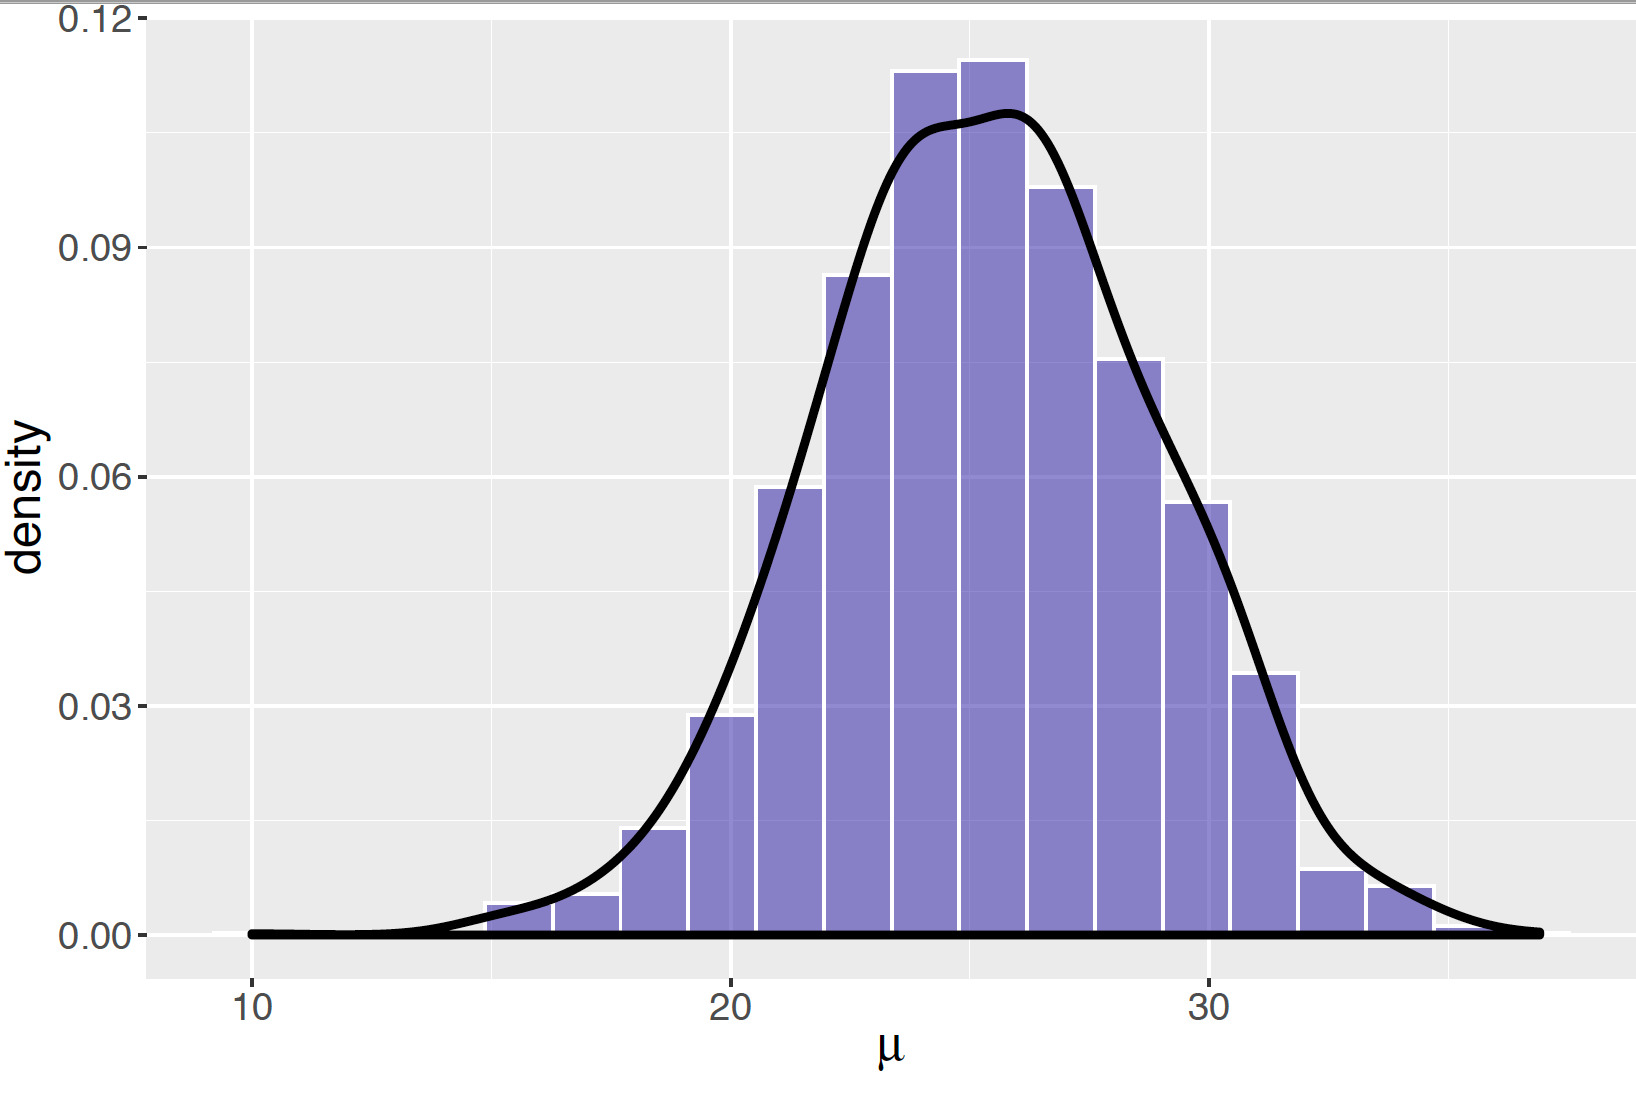 Histogram of simulated draws of the normal mean using the Metropolis algorithm with $C = 20$. The solid curve is a density estimate of the simulated values.